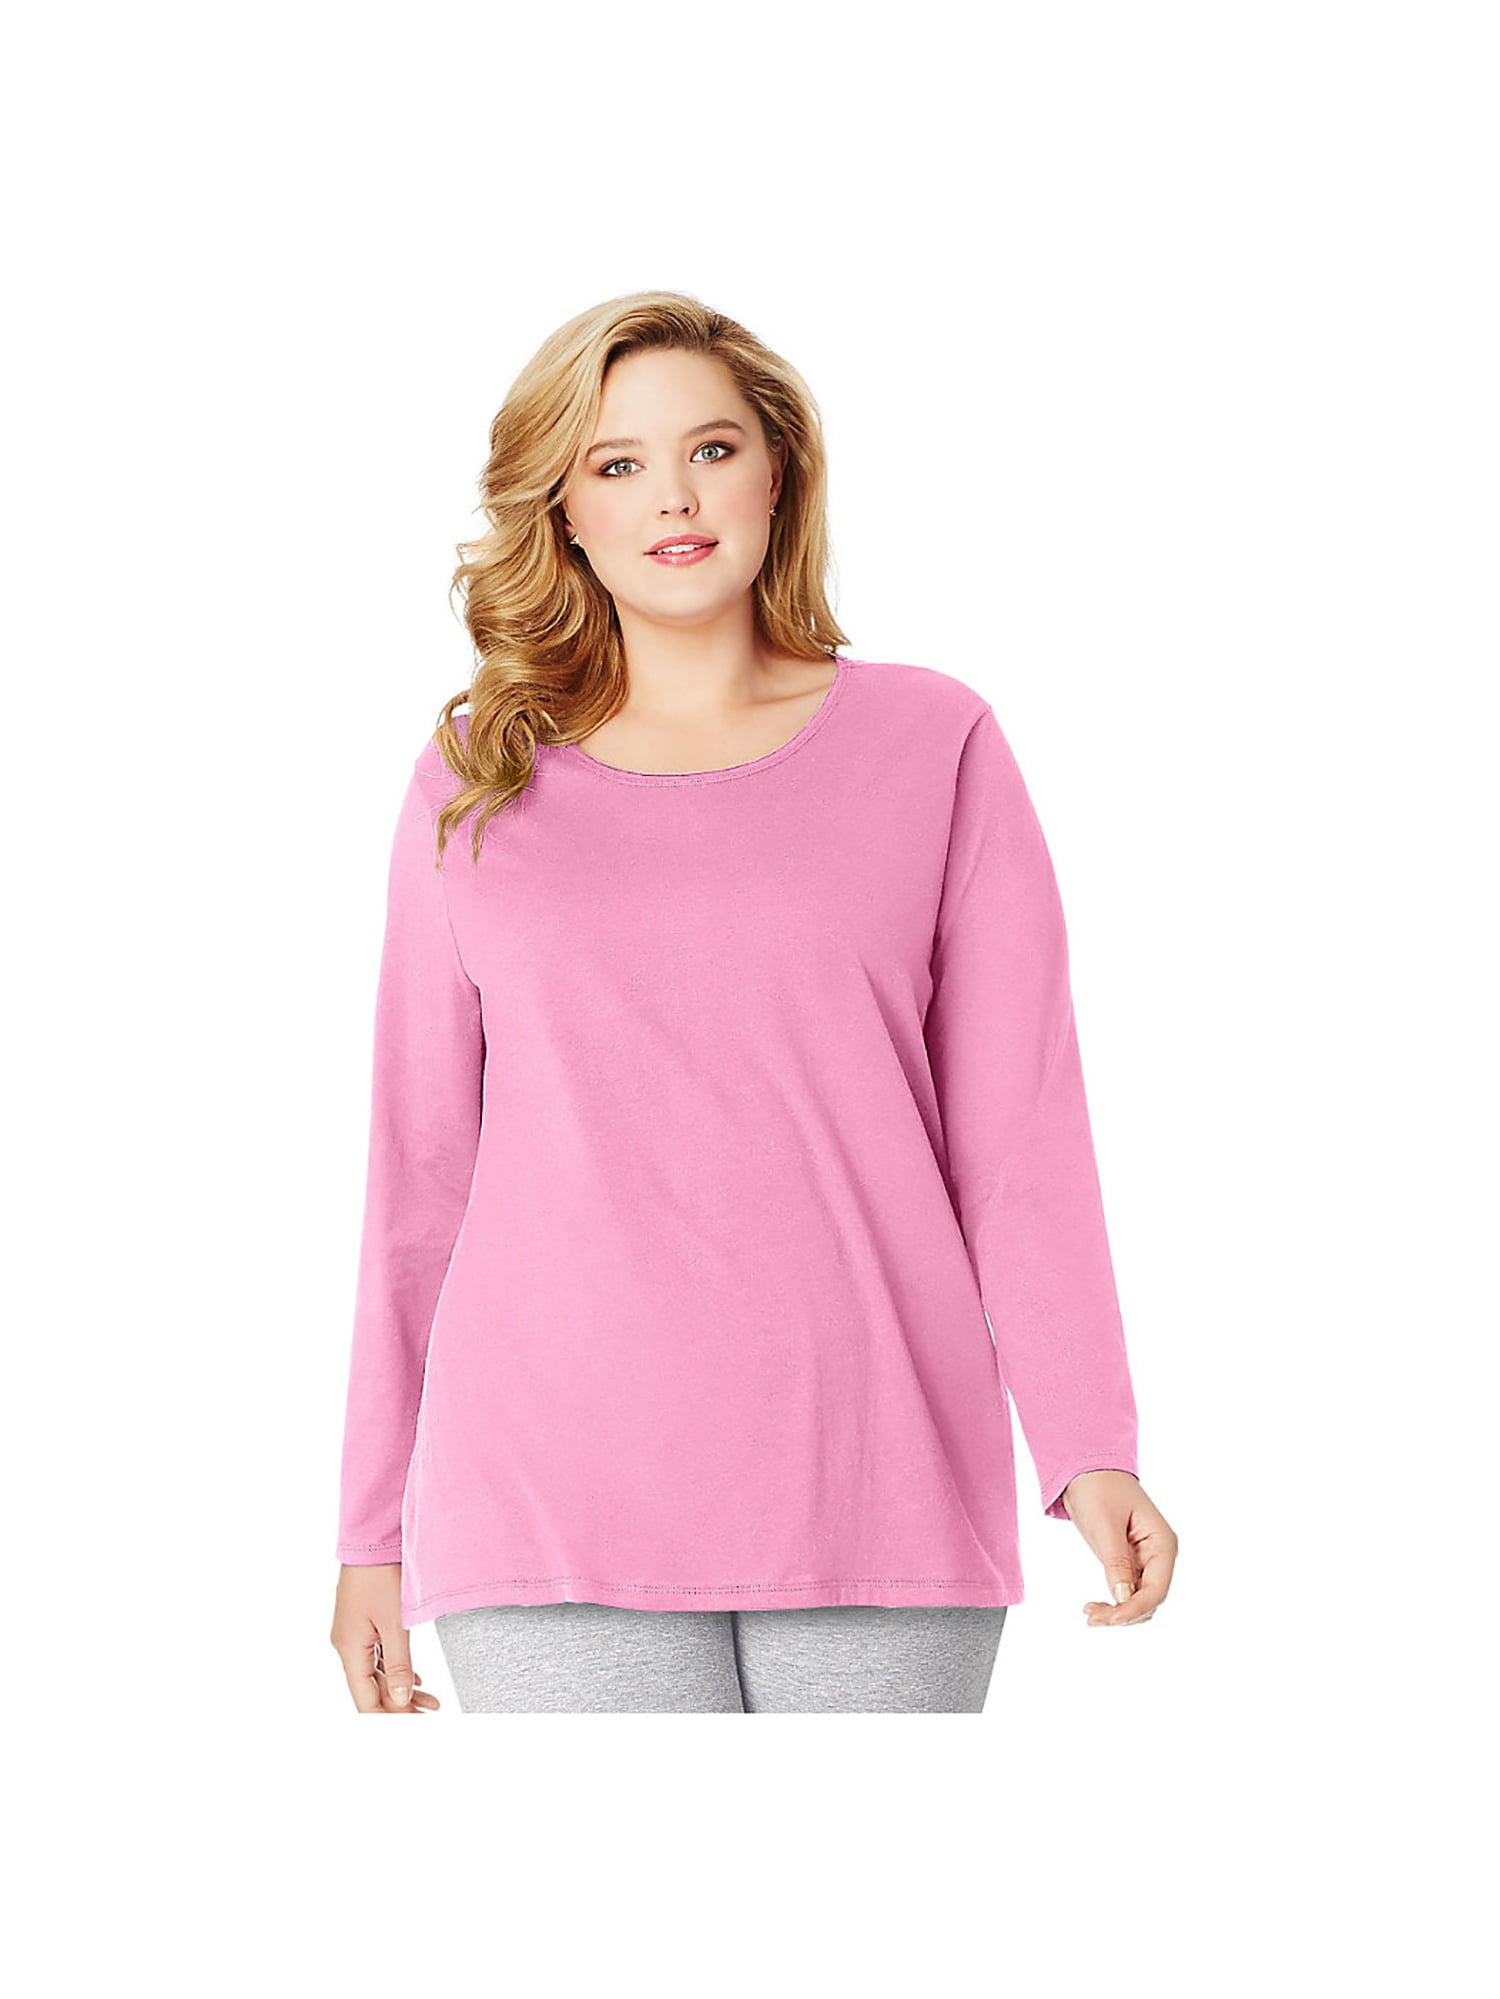 Just My Size Women's Long-Sleeve Scoop-Neck 100% Cotton T-Shirt, Style ...